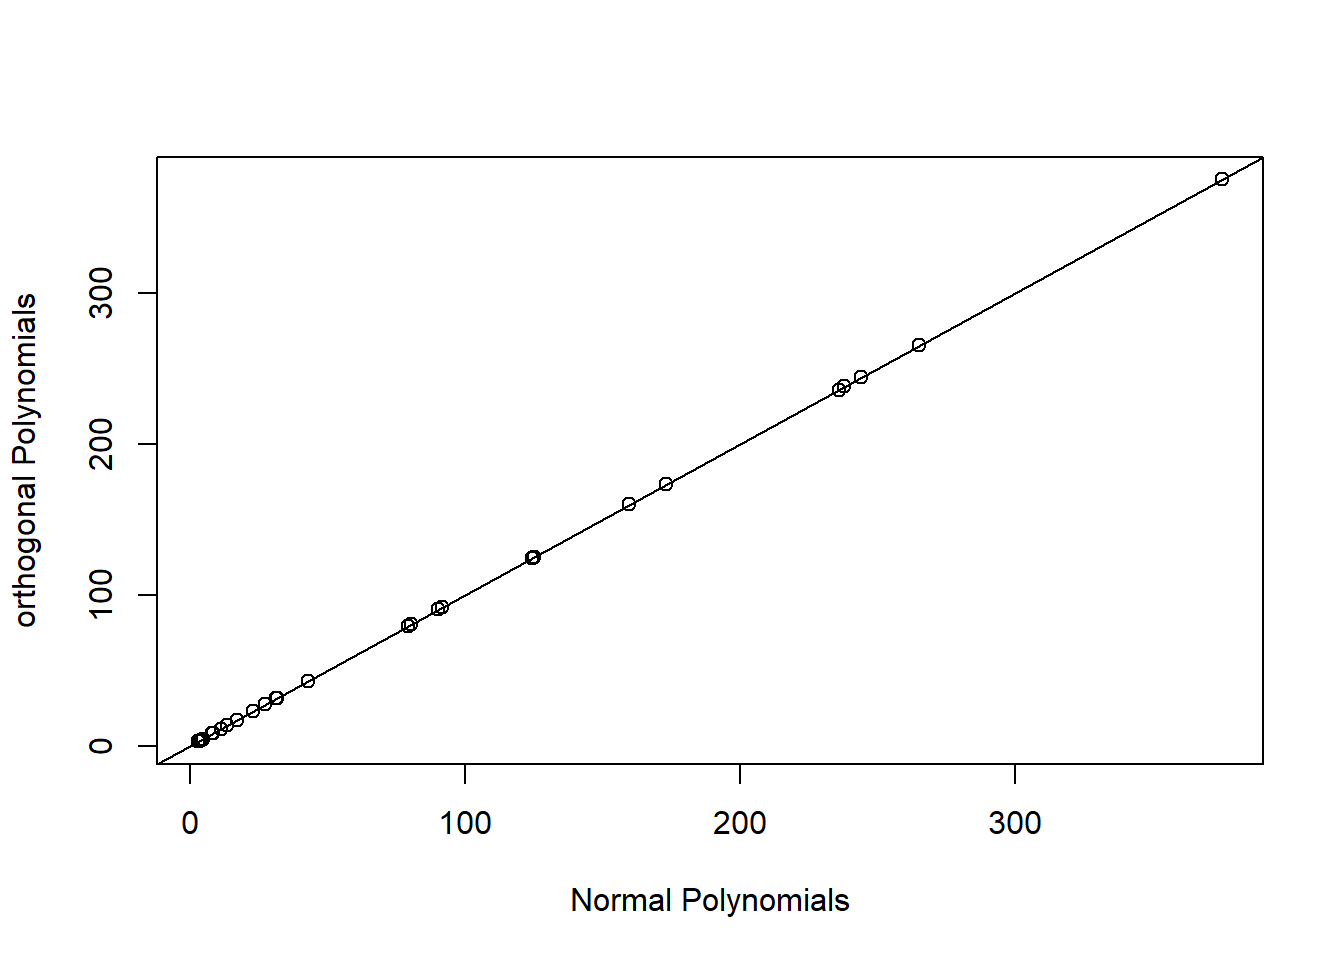 Predicted values for models using raw and orthogonal polynomials, demonstrating their equivalence.